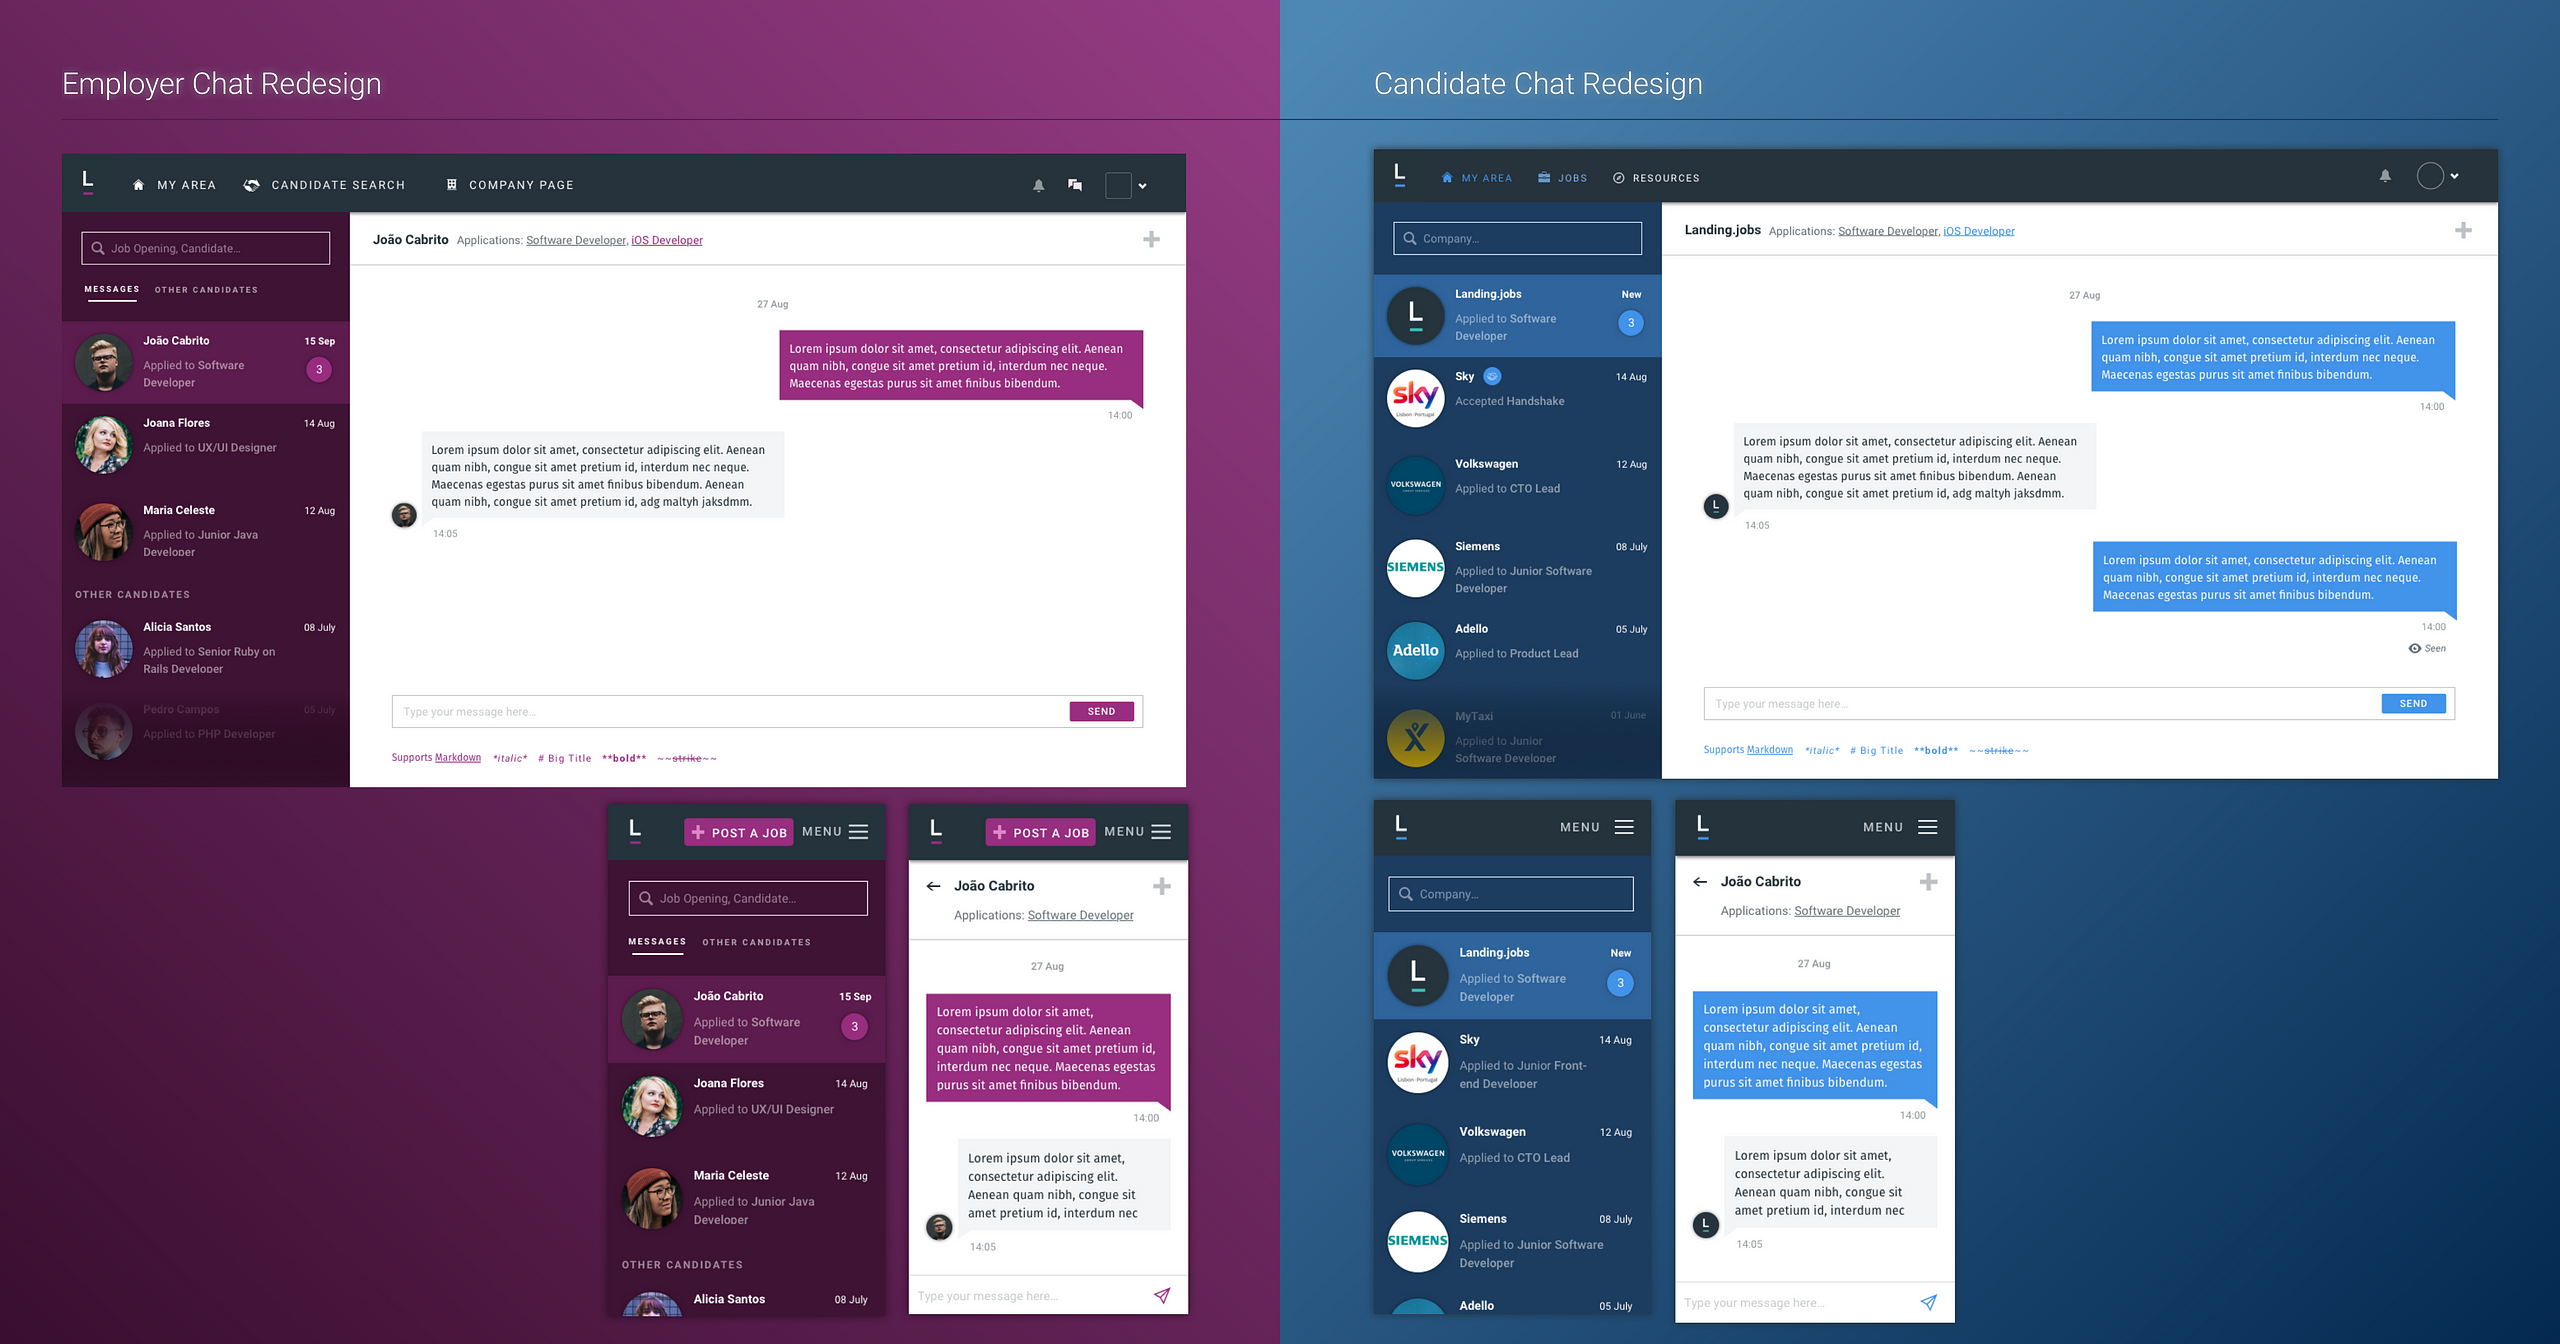 Employer Chat Redesign versus Candidate Chat Redesign